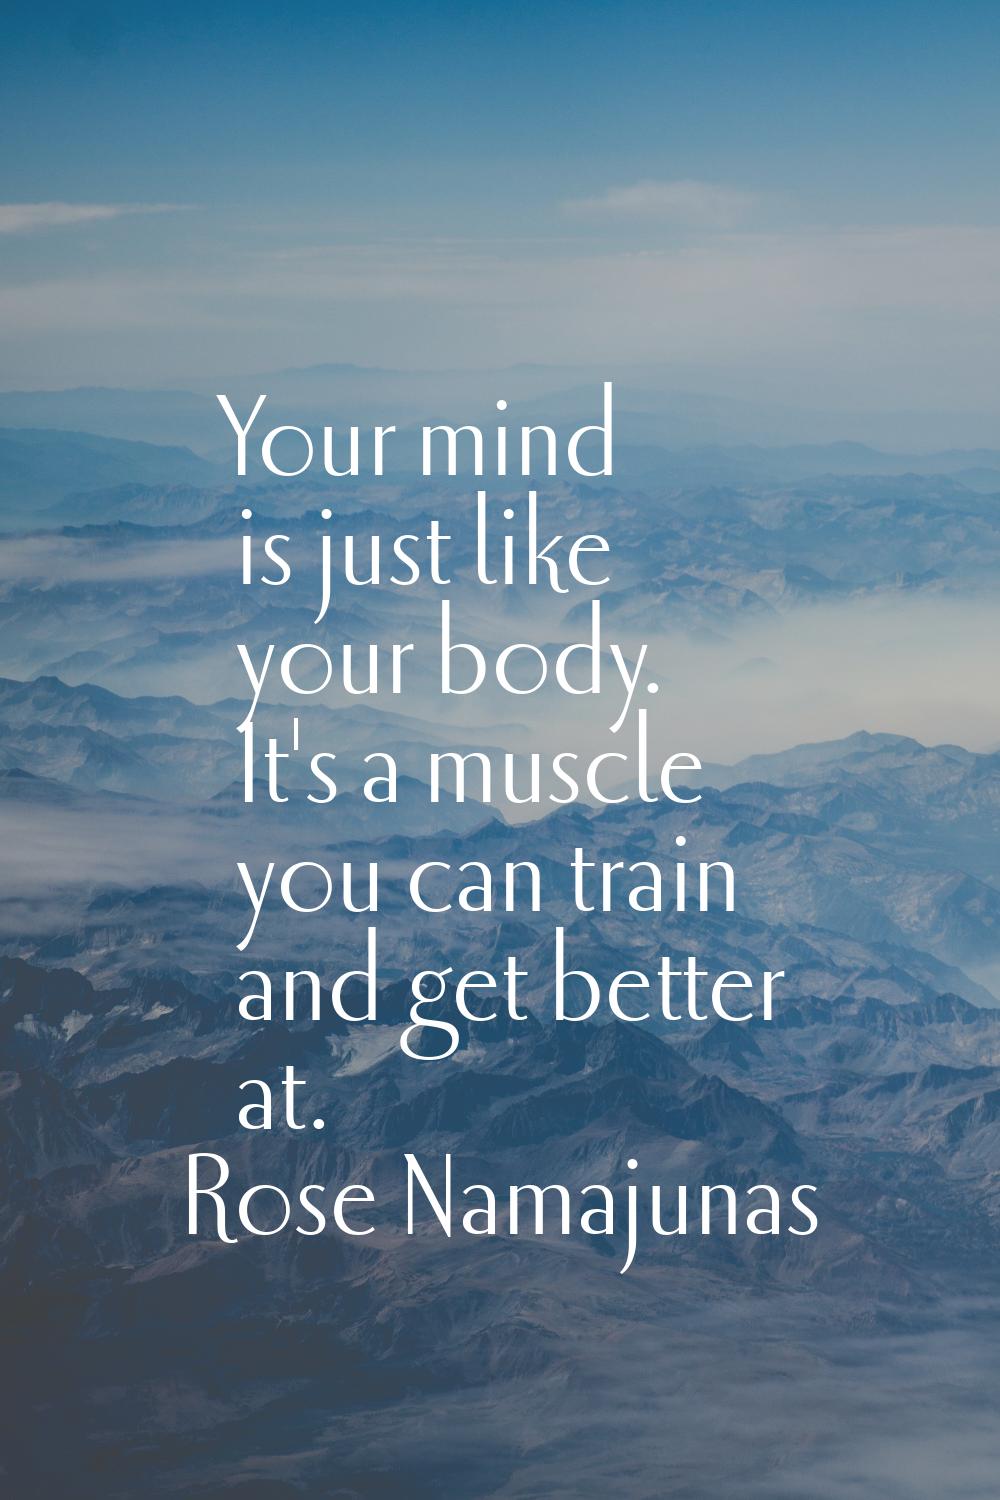 Your mind is just like your body. It's a muscle you can train and get better at.